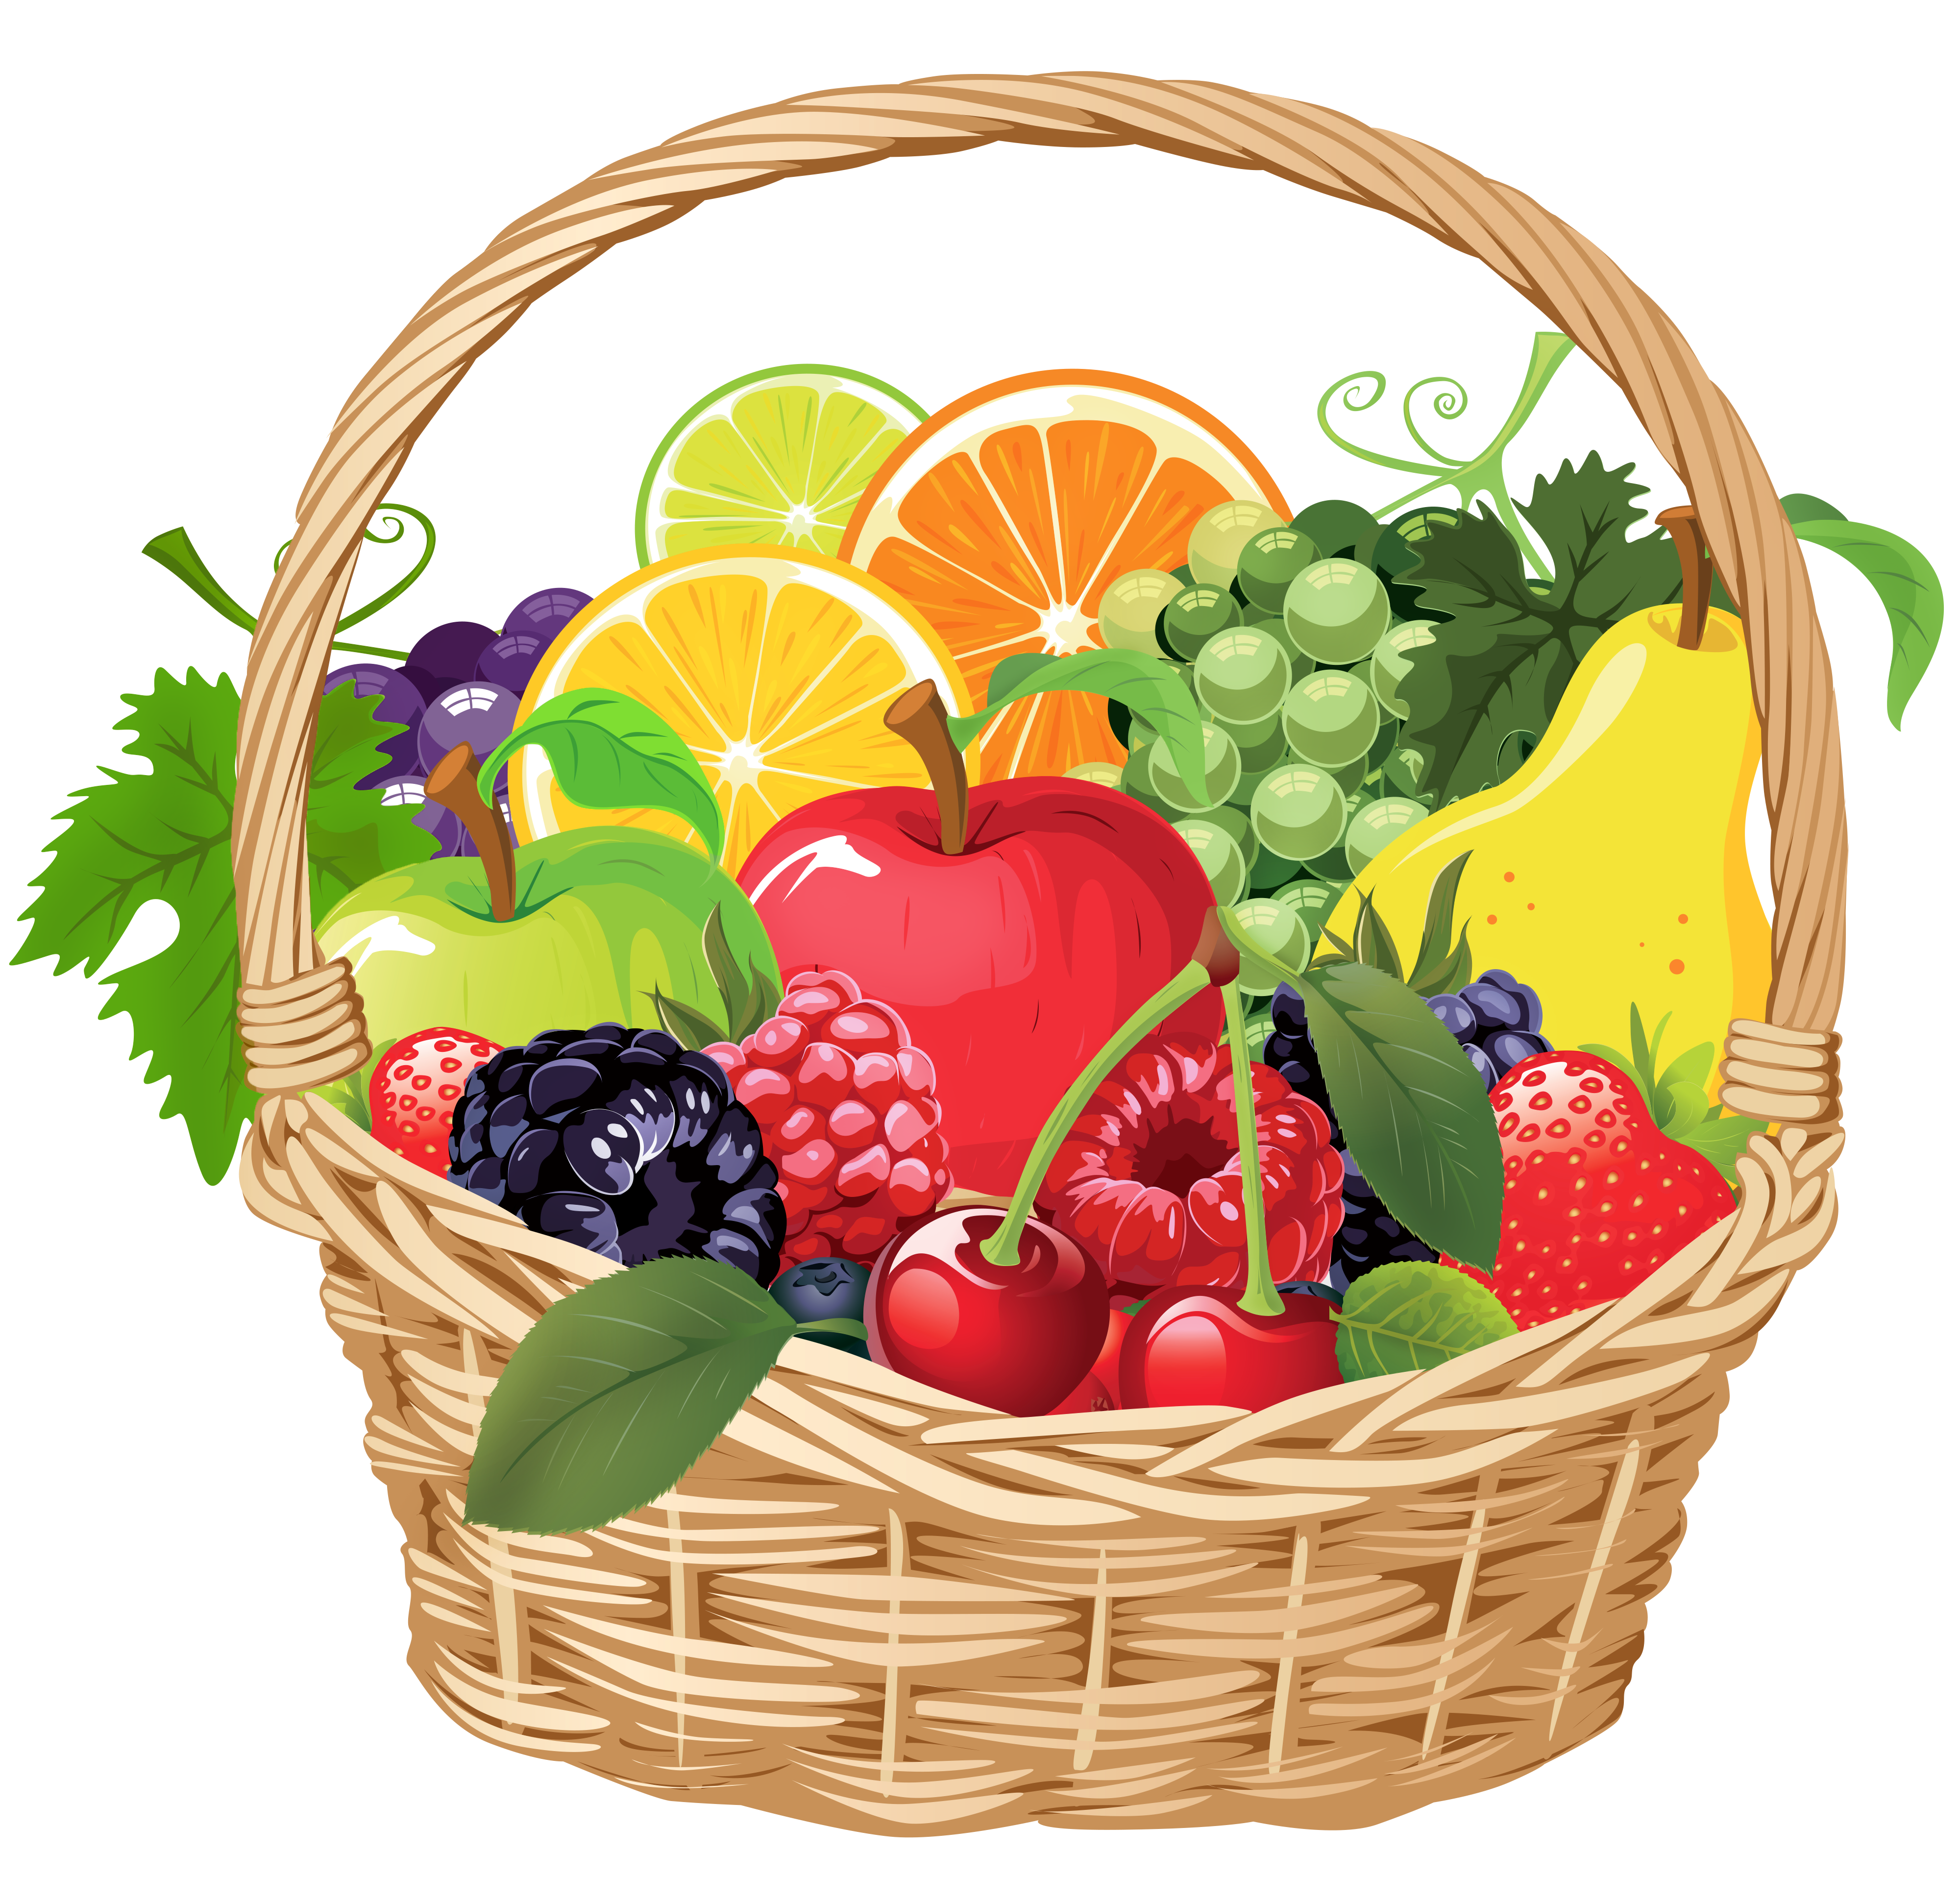 Free Bowl Of Fruit Png, Download Free Clip Art, Free Clip.